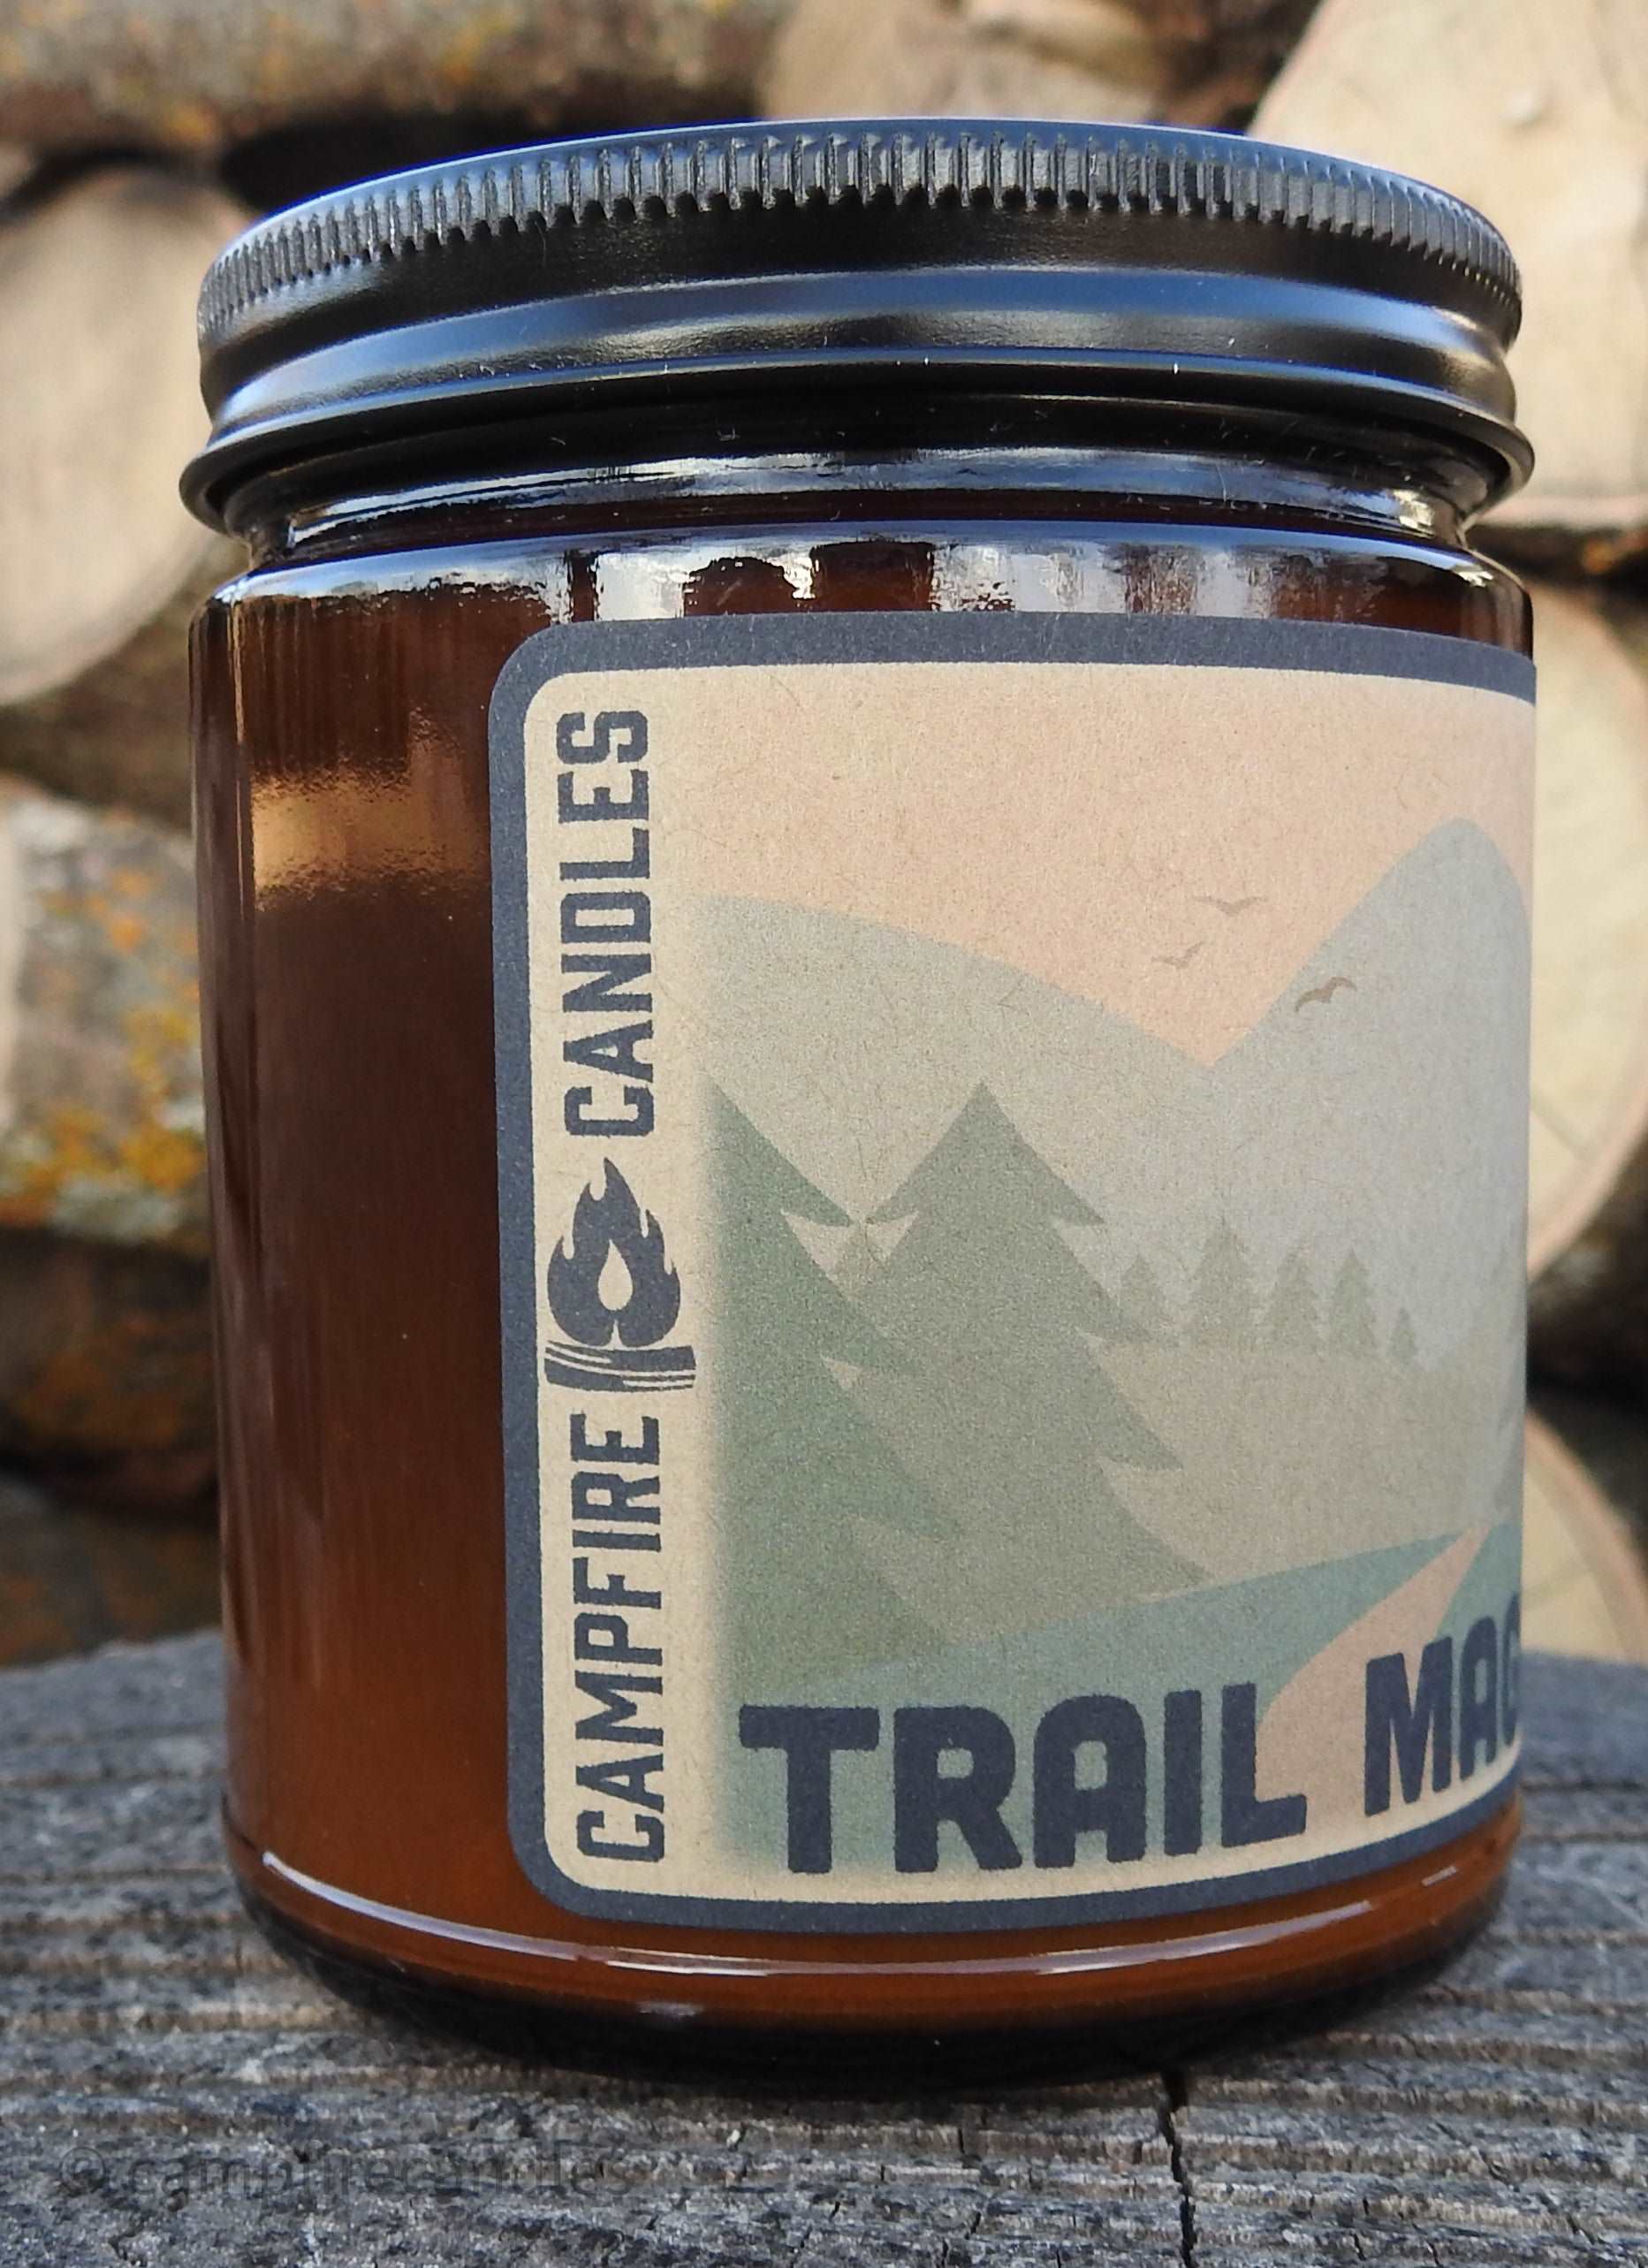 Trail Magic | Soy Candle with Wooden Wick | Campfire Candles